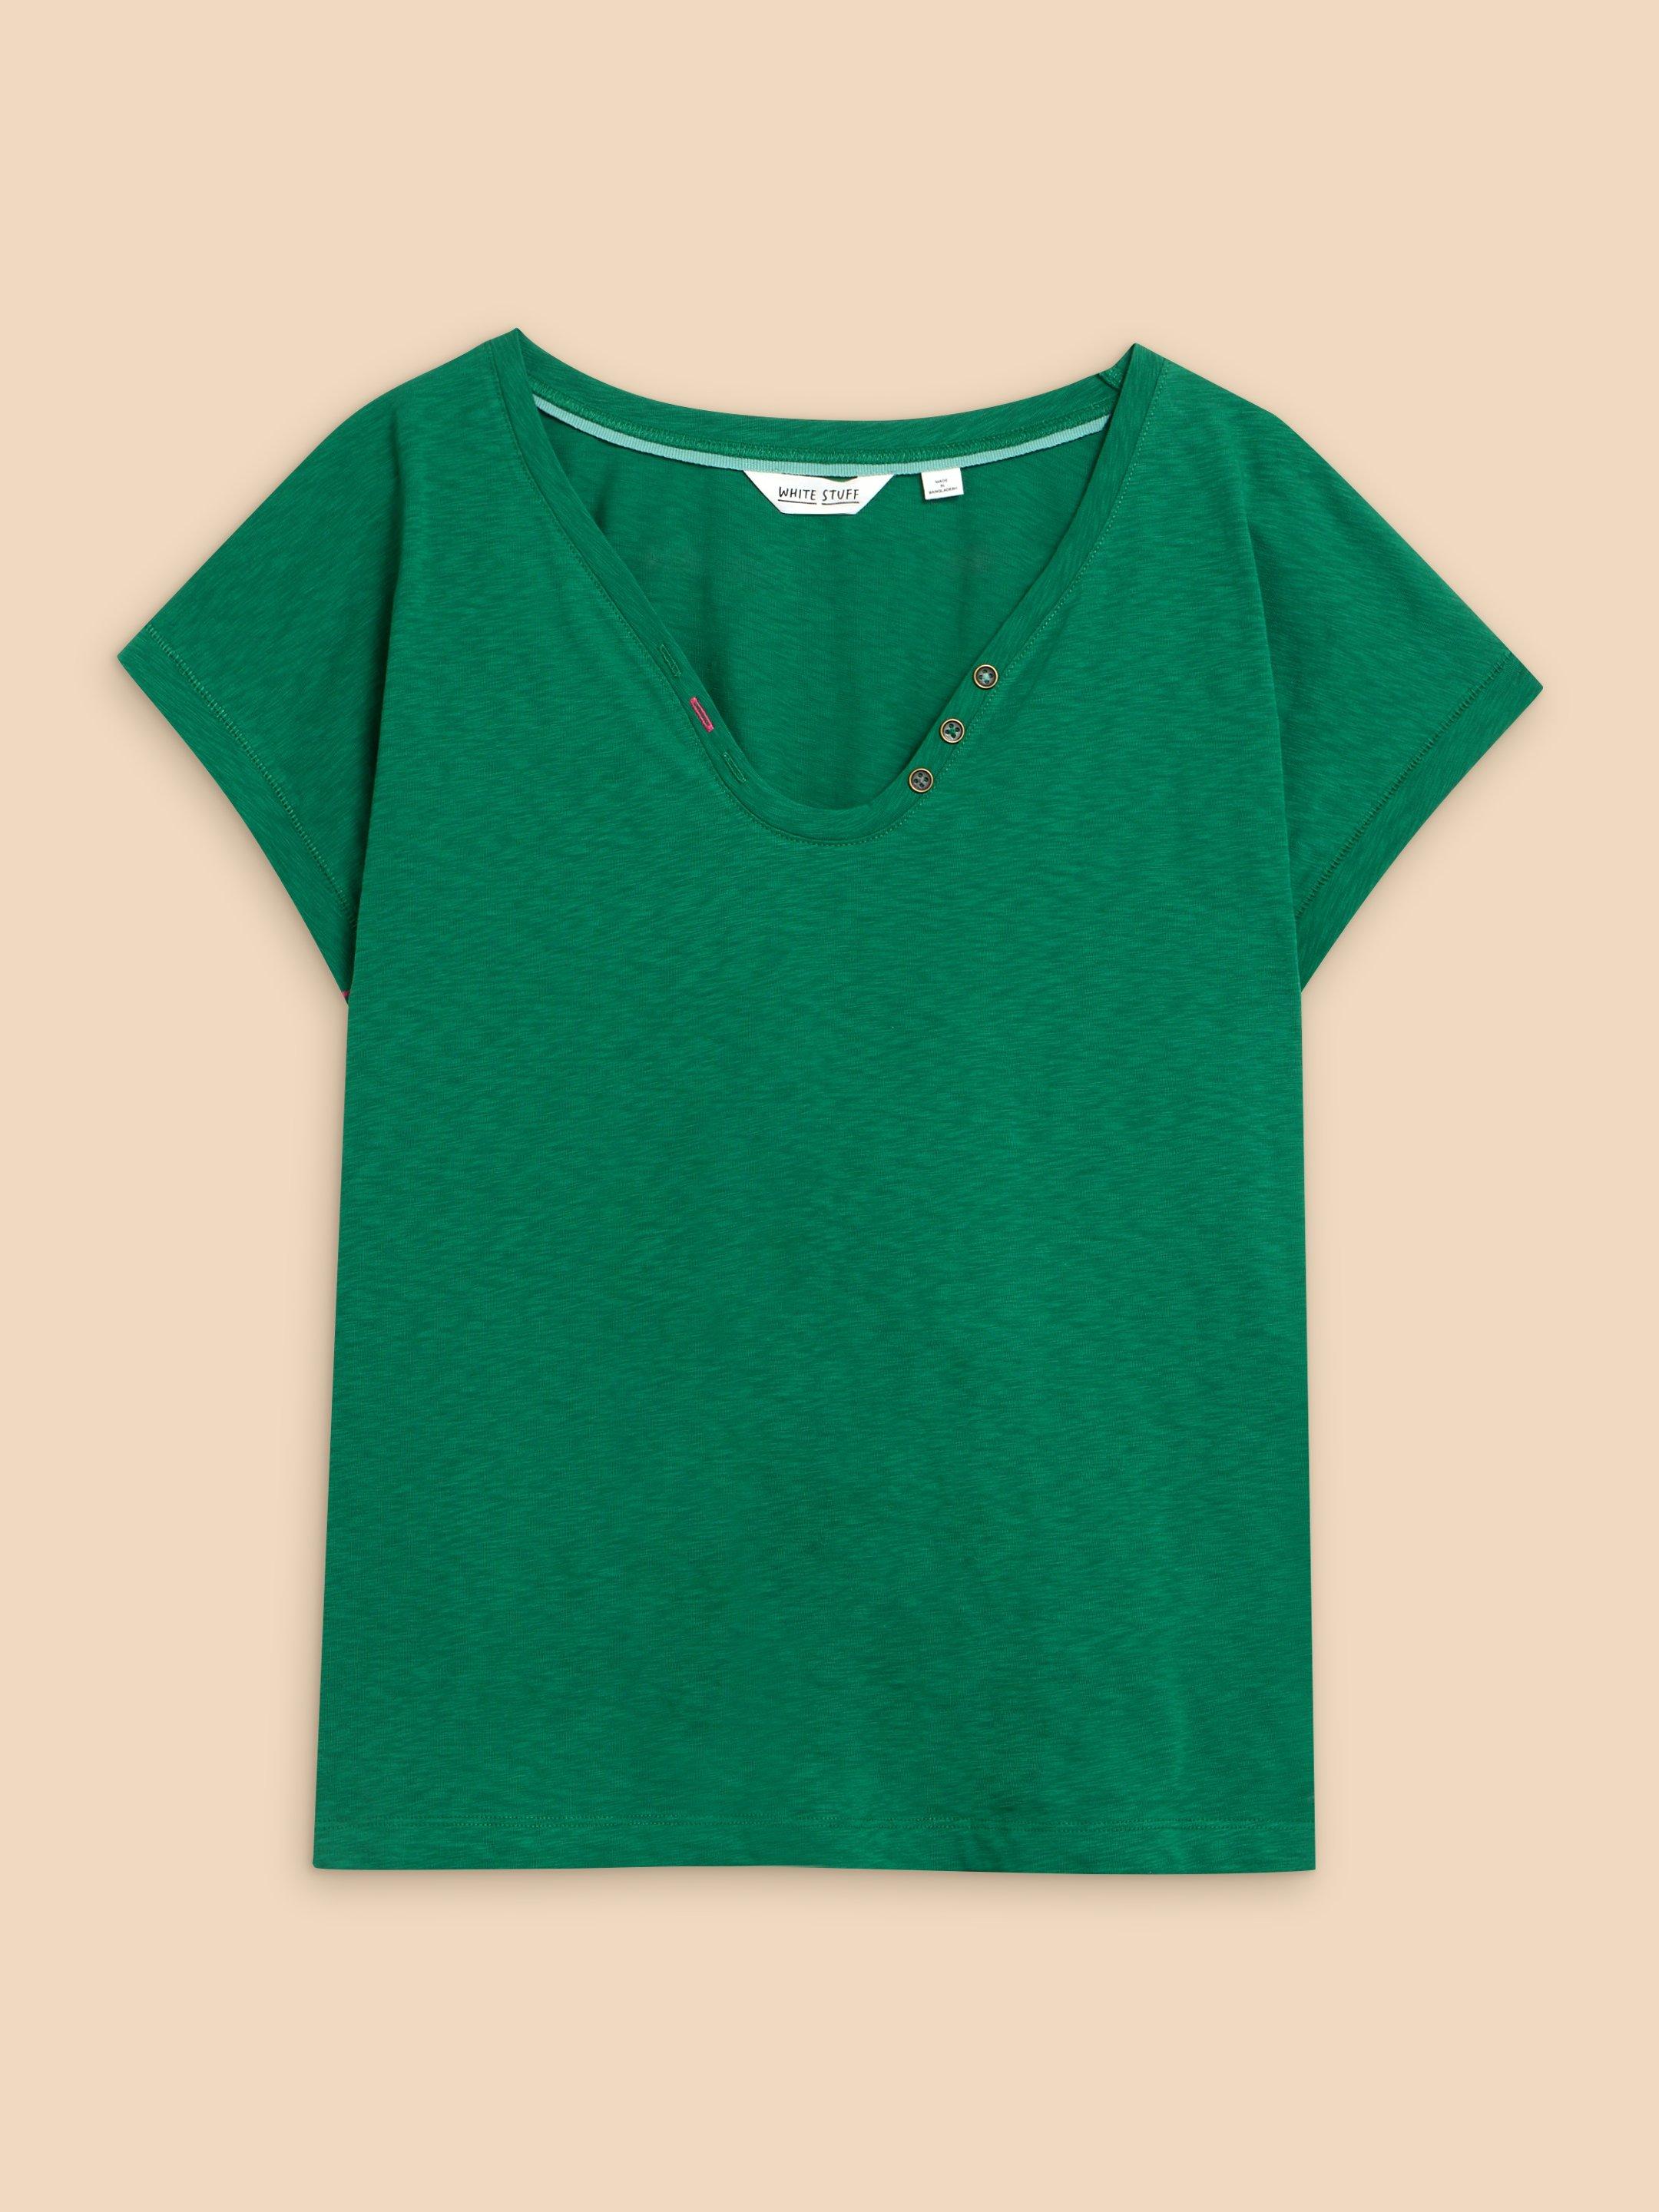 NIKKI SS TEE in MID GREEN - FLAT FRONT